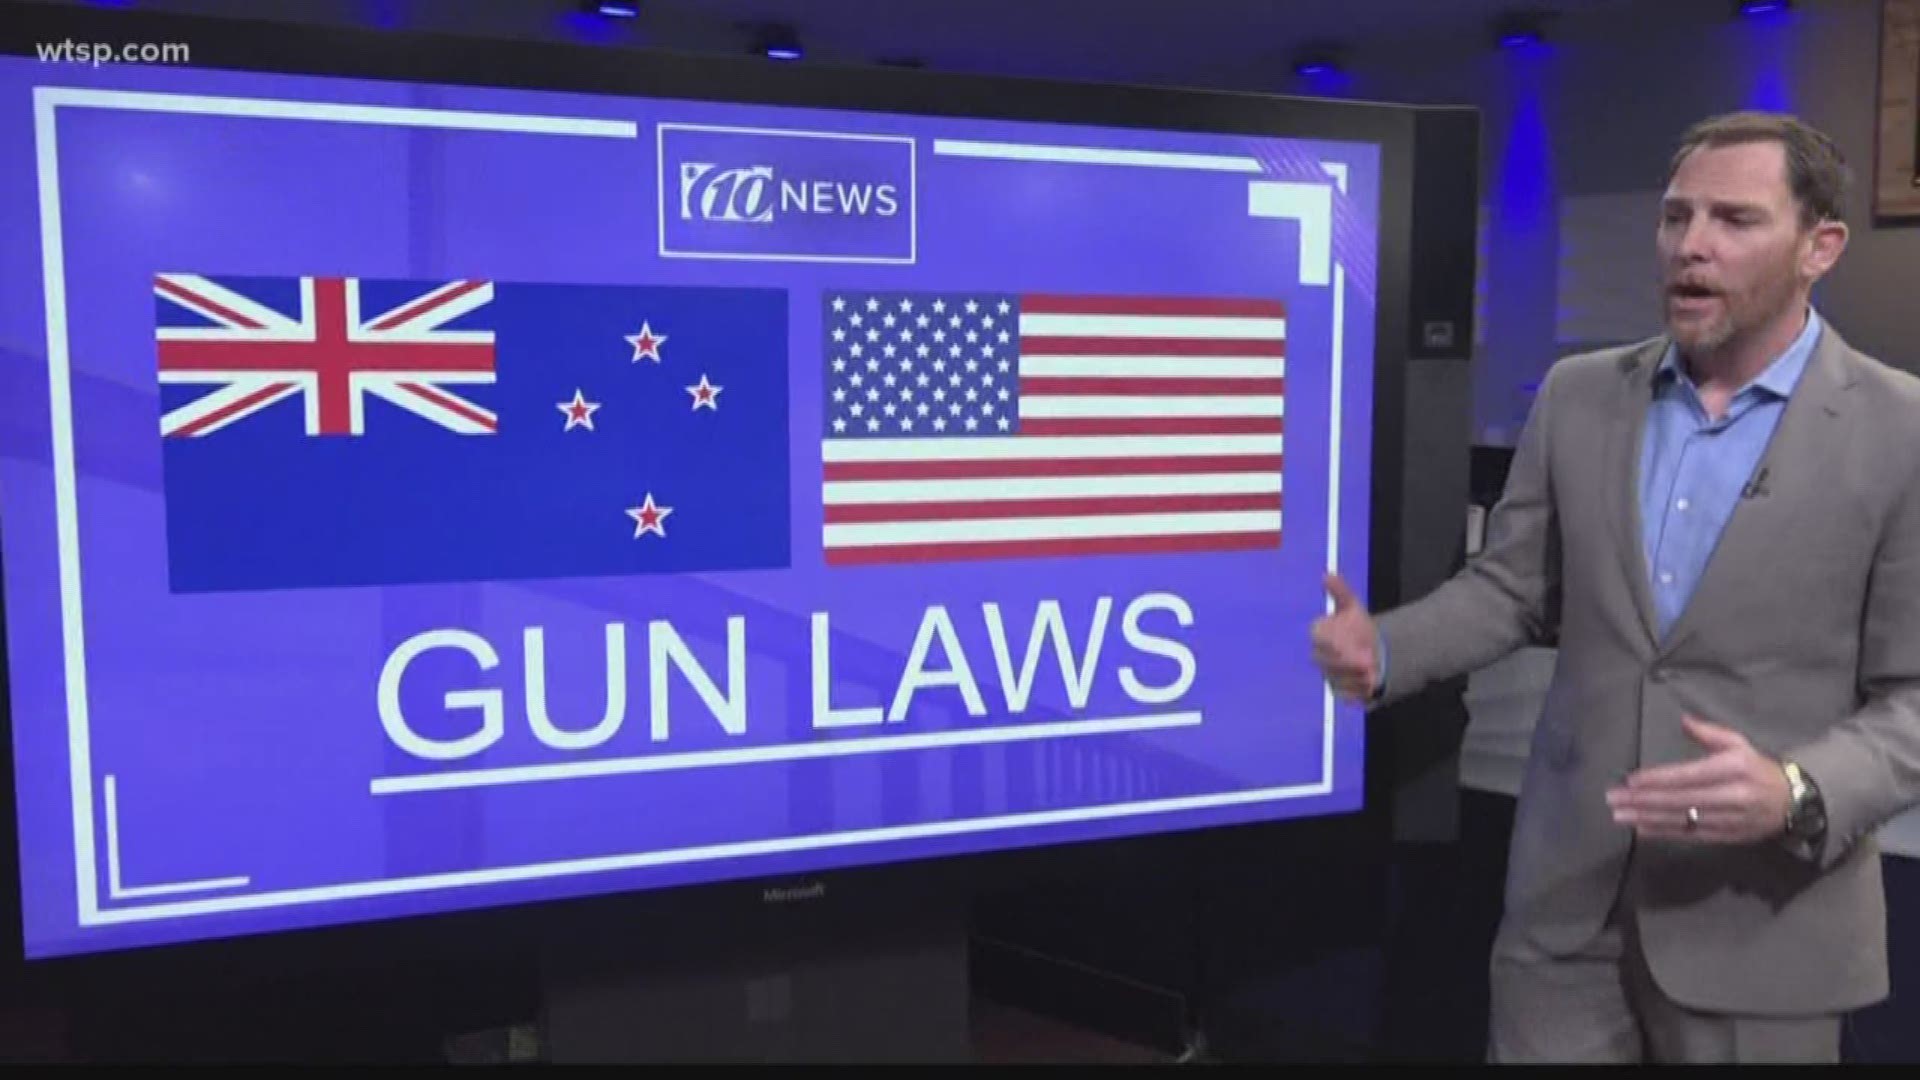 While New Zealand works double-time to enact more strict gun laws, we've heard from many of you wondering why hasn't the same thing happened in the United States after any one of our mass shootings.